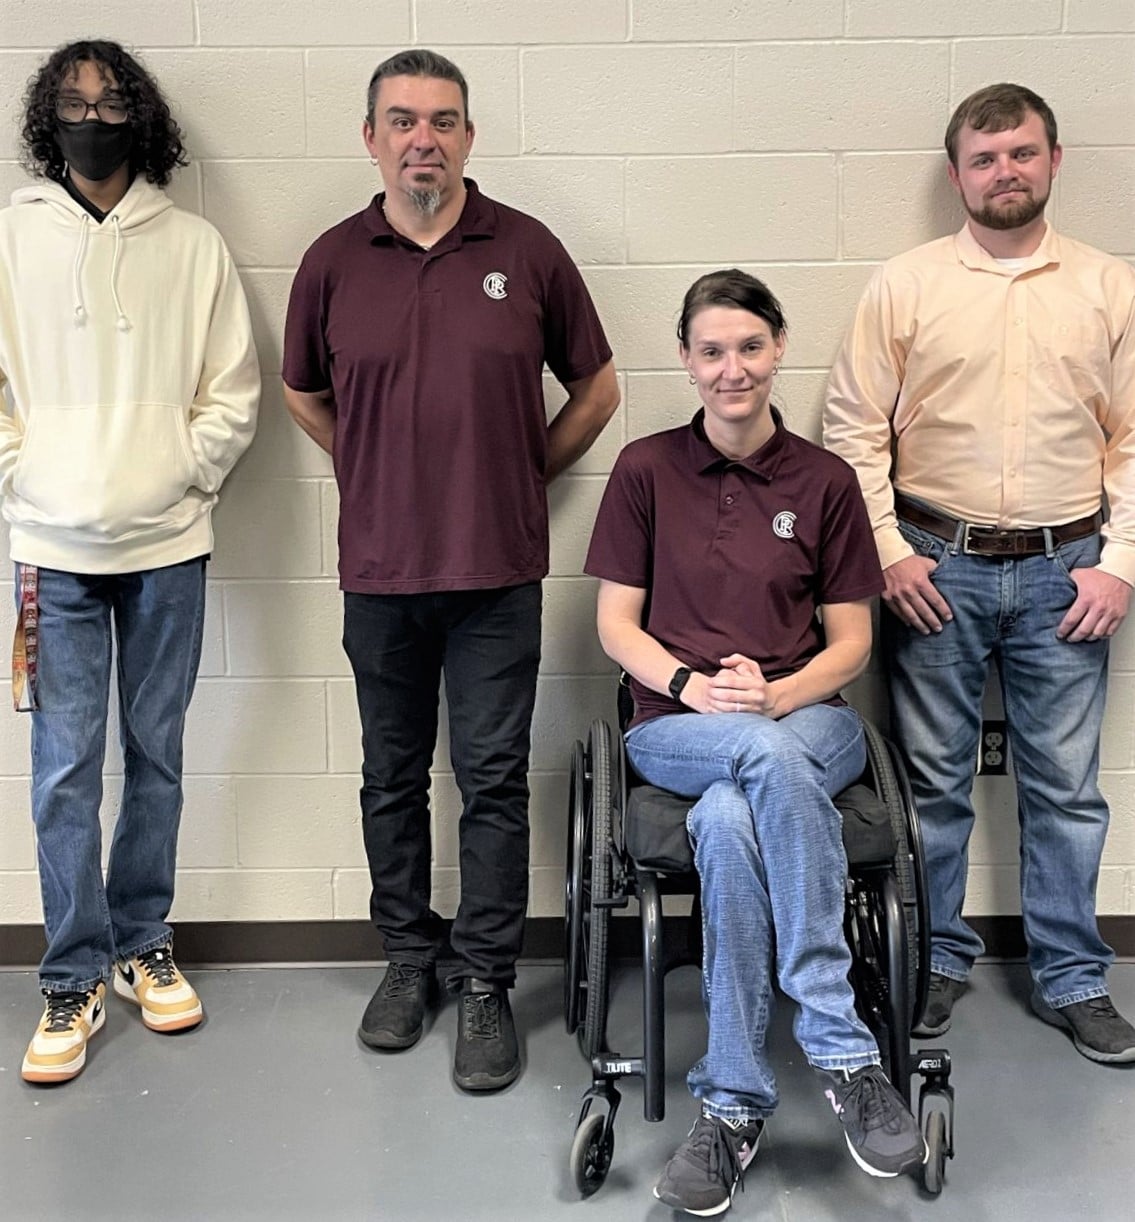 Pearl River Community College students Sungjin Farris (left) and Joshua Loper (right), pictured with instructors Dustin Chambliss and Sam McNease